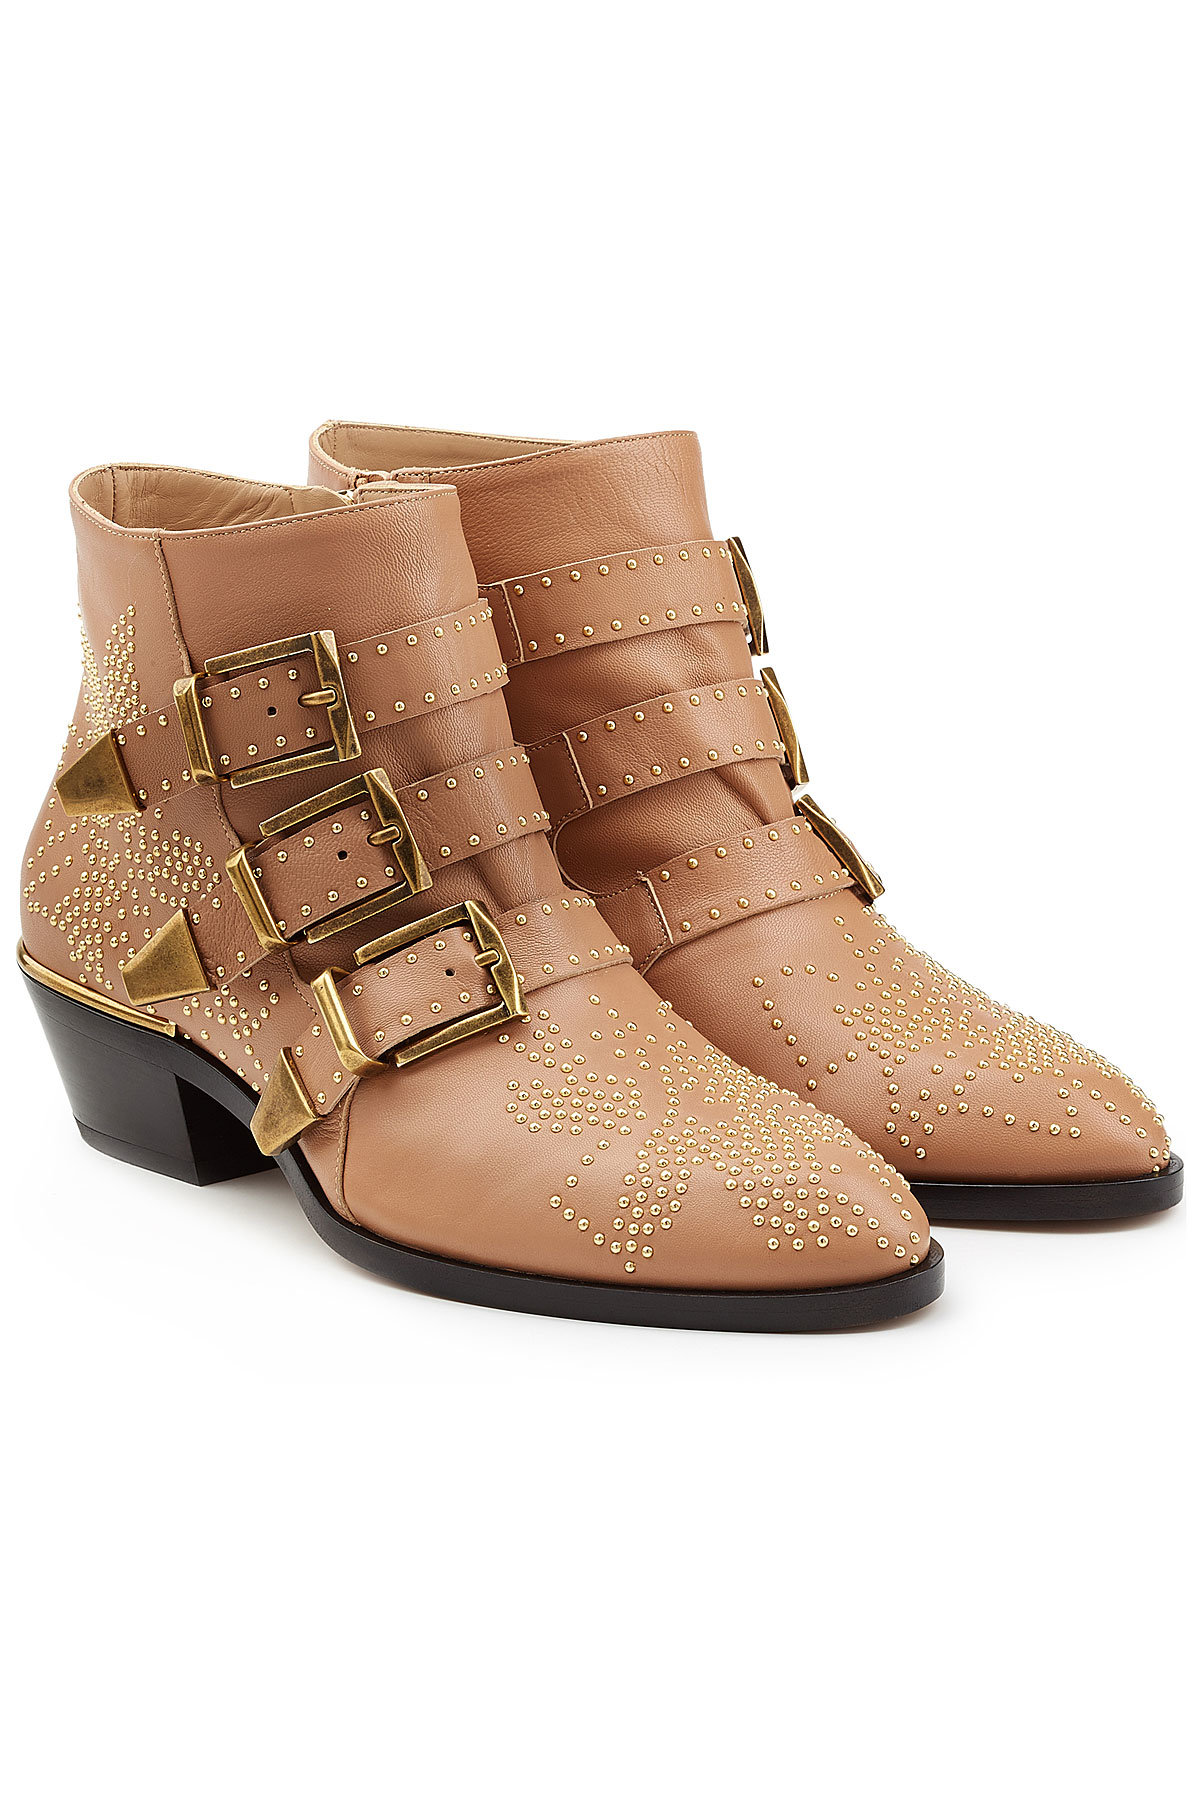 Studded Ankle Boots by Chloe